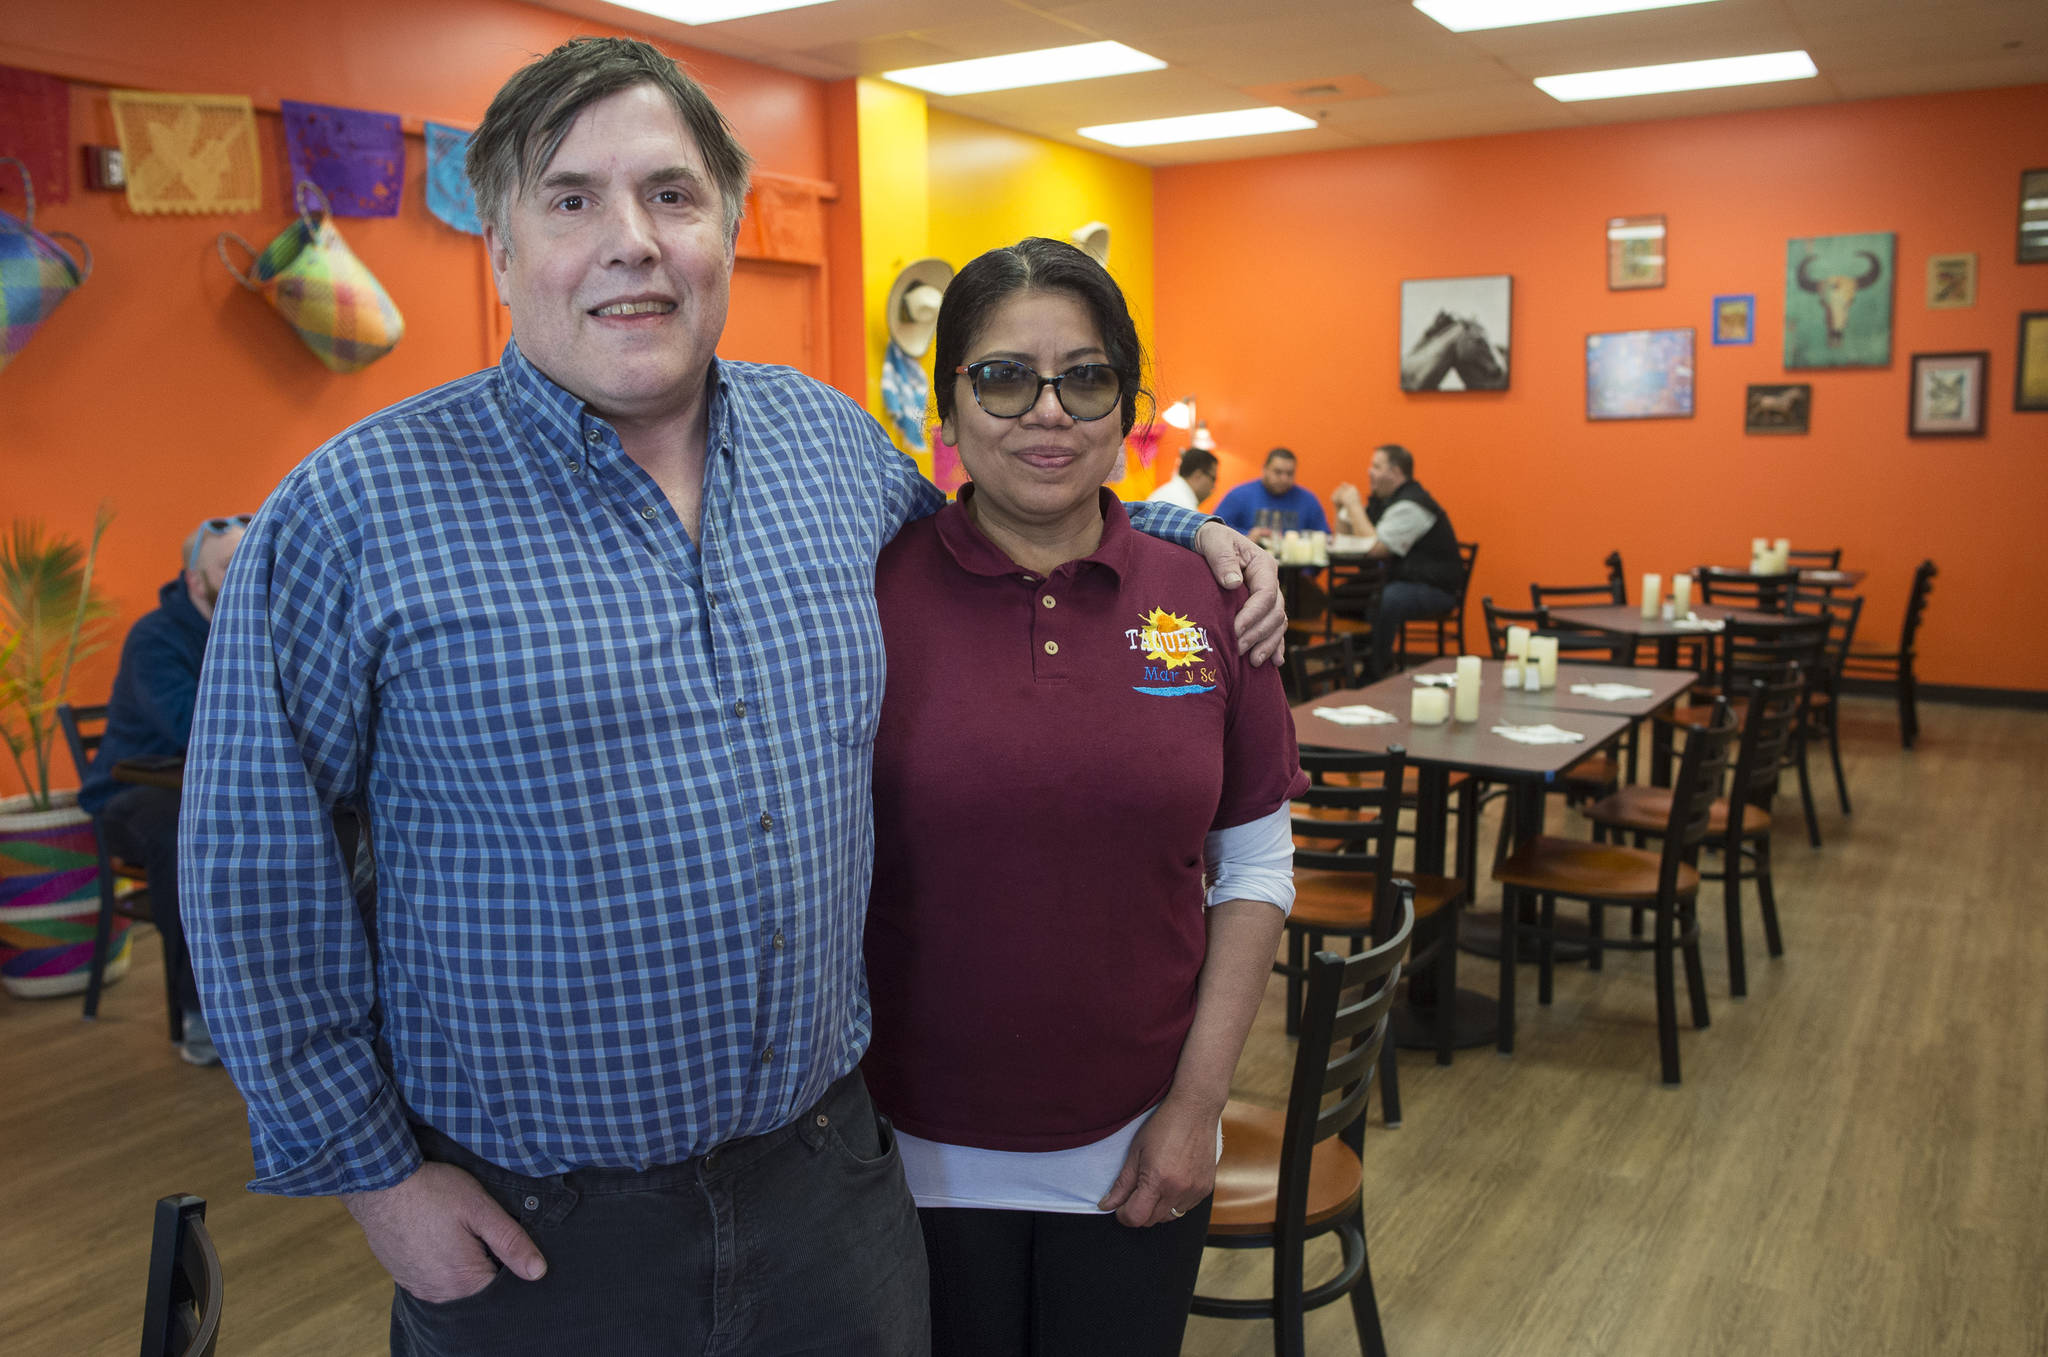 Richard Bloom and Melissa Ramirez have expanded their business, Mar y Sol, from a food truck to an indoor restaurant at the Foodland Shopping Center. (Michael Penn | Juneau Empire)